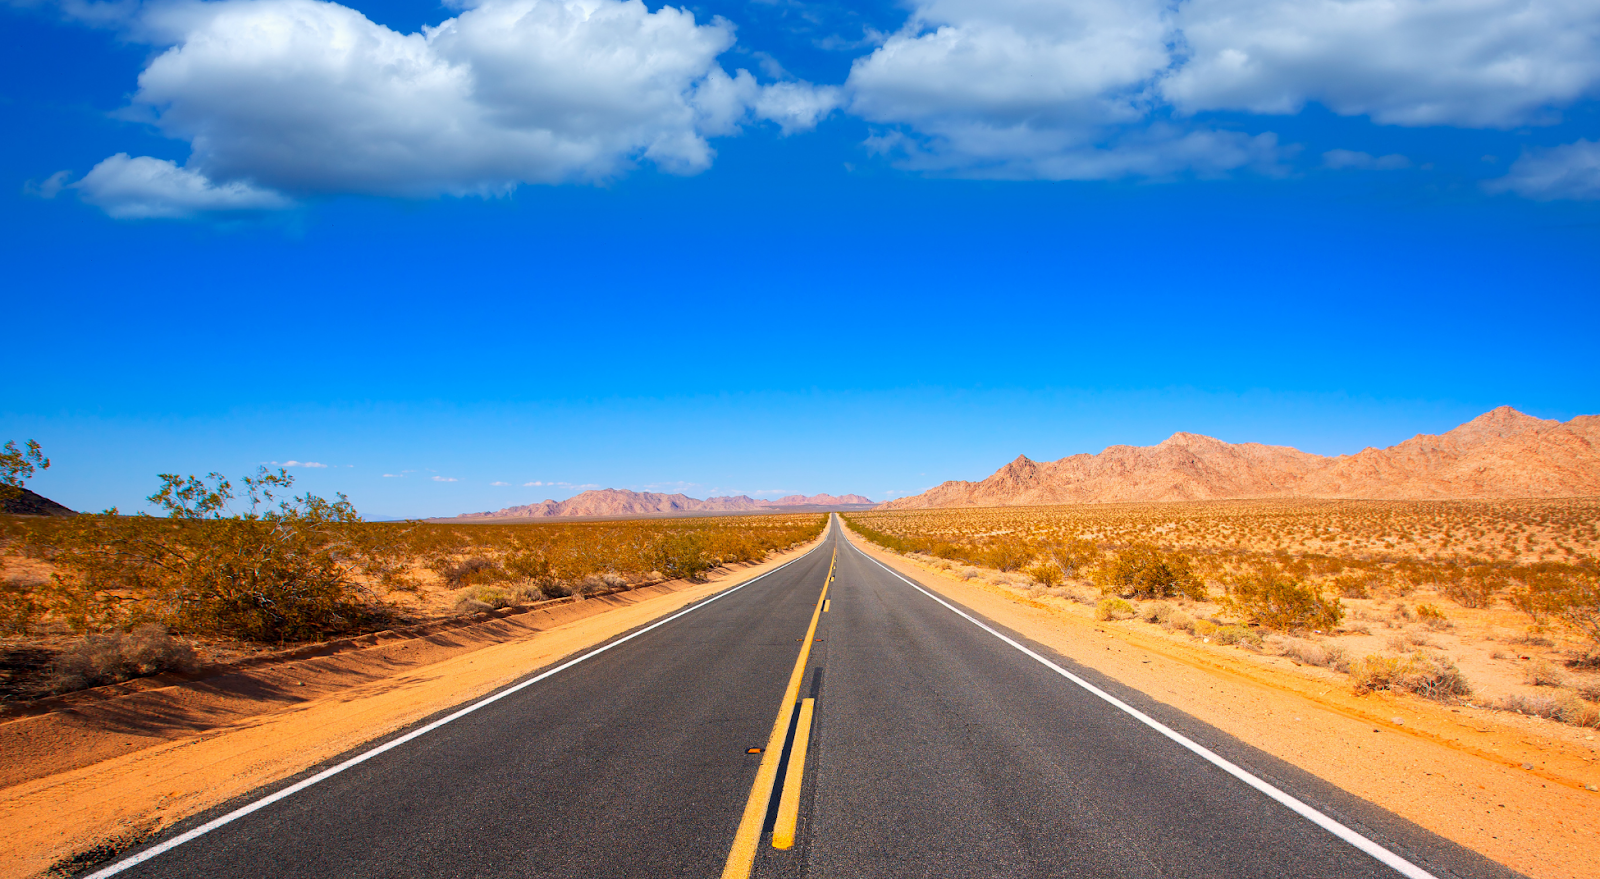 A to Z Bucket List - open road image of Route 66 in the Mohave Desert
